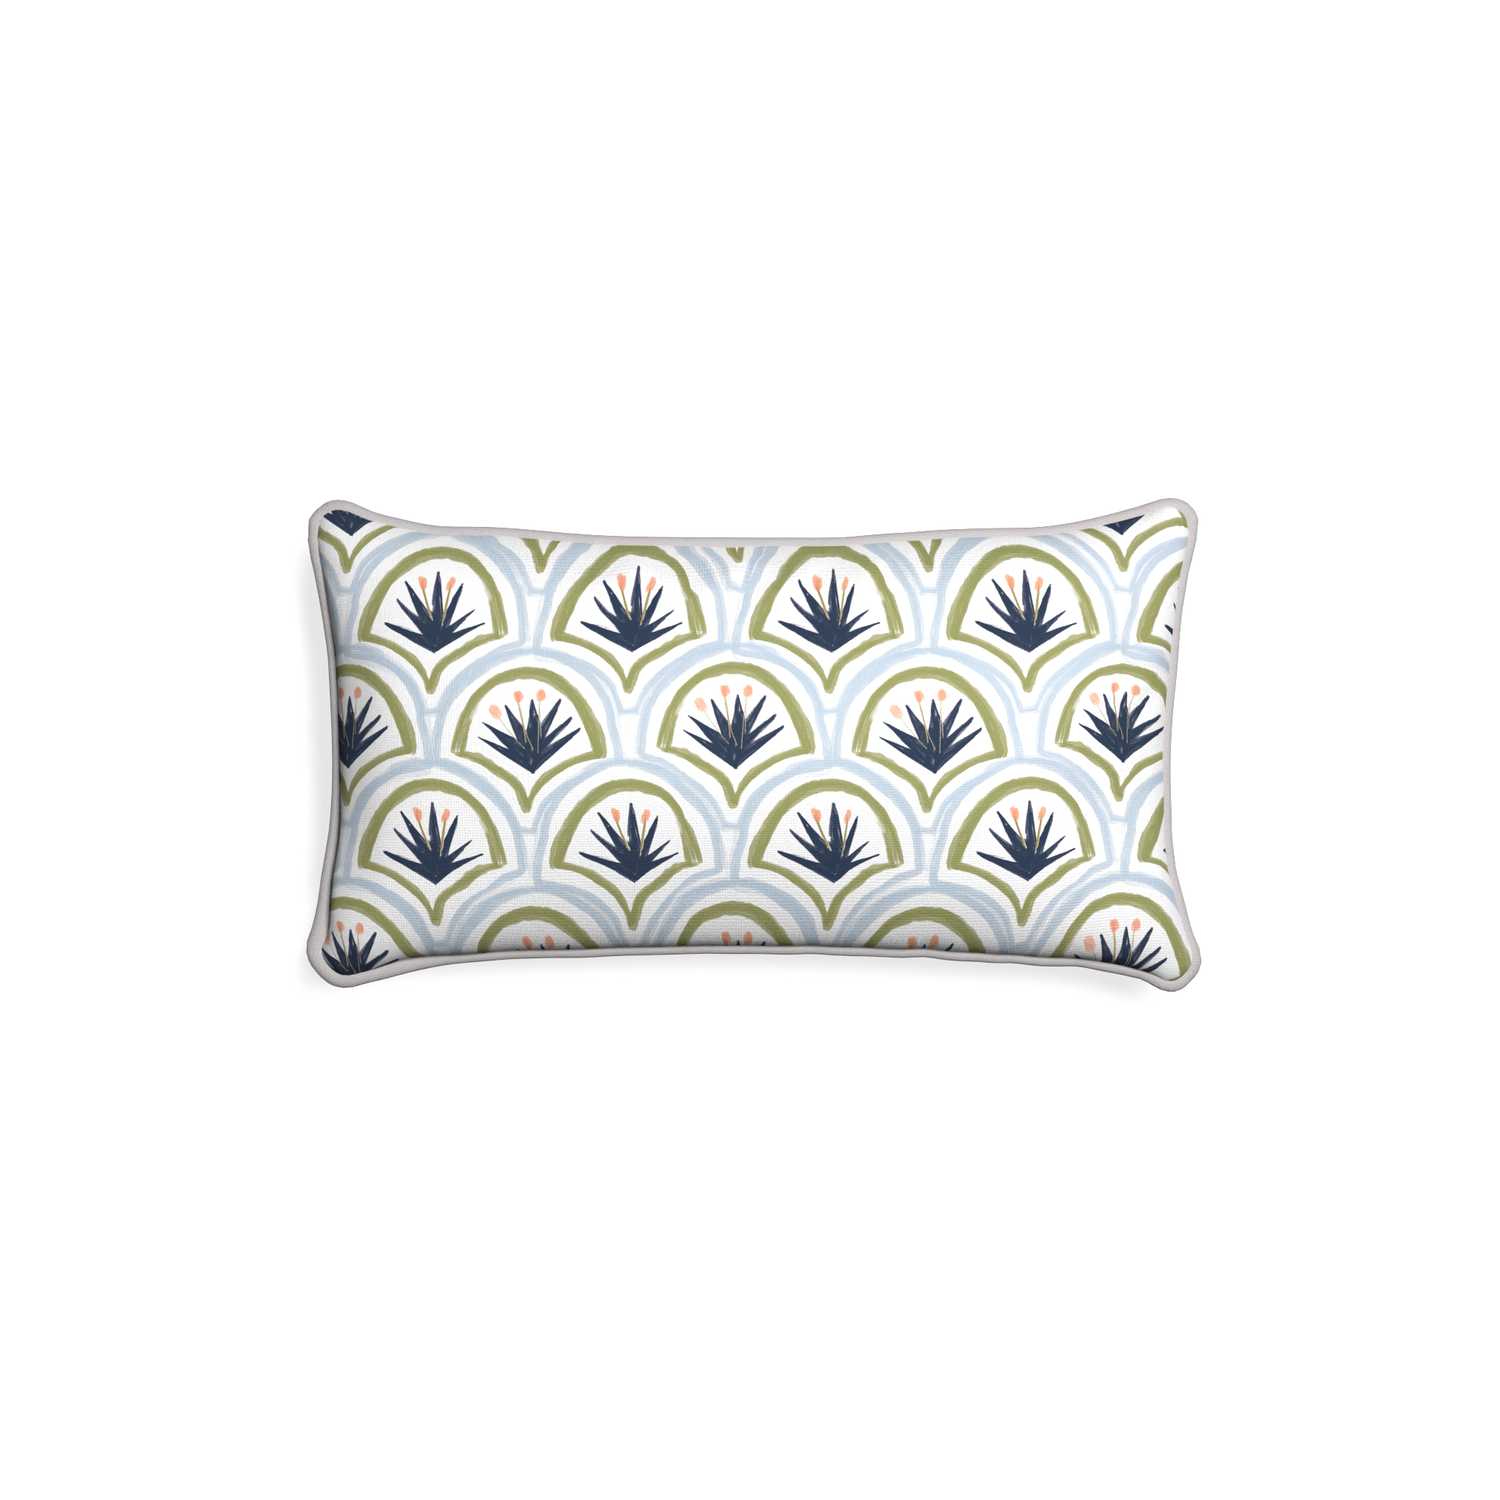 Petite-lumbar thatcher midnight custom art deco palm patternpillow with pebble piping on white background